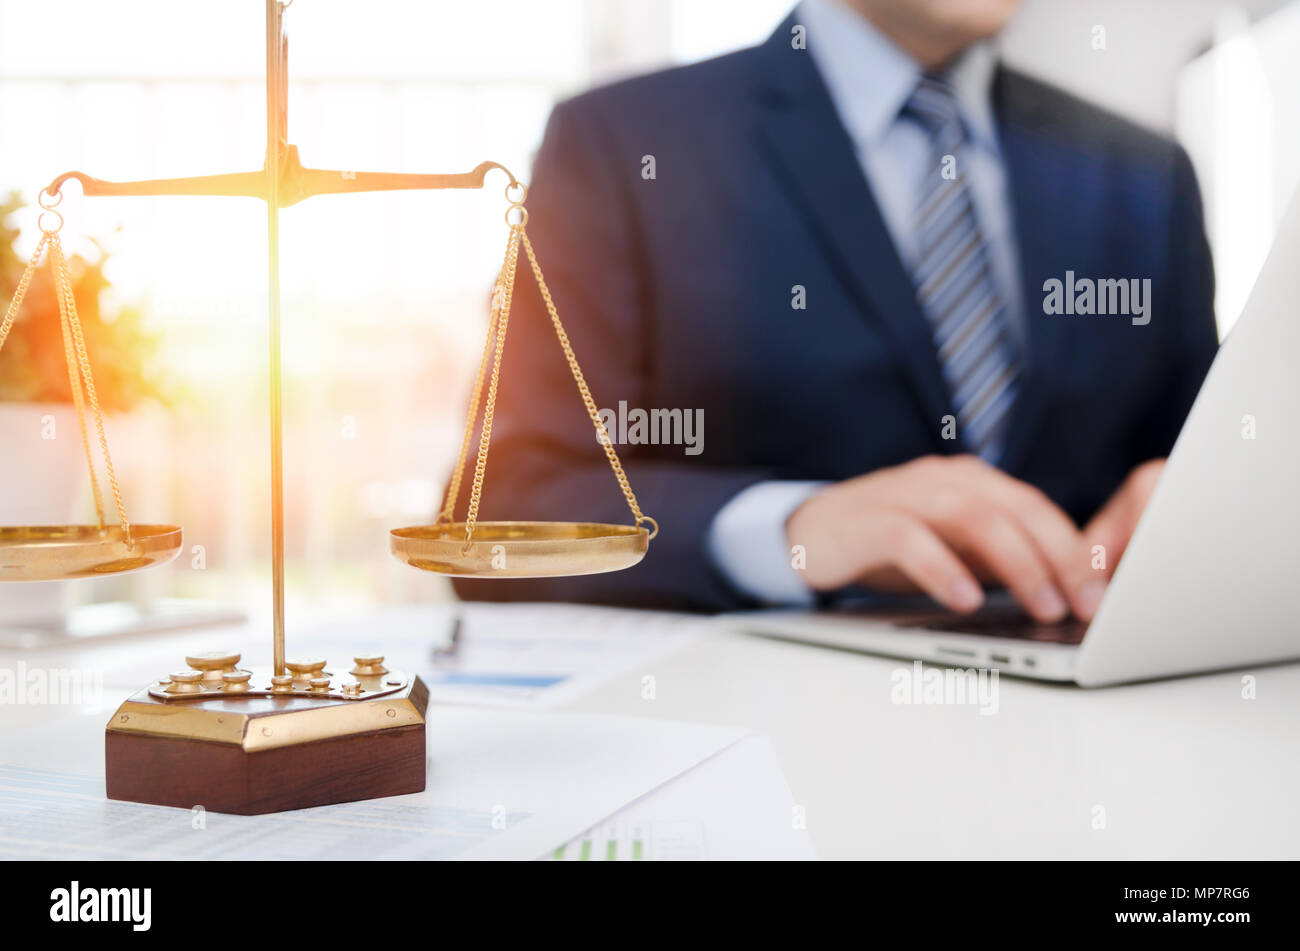 Justice symbol weight scales on table. Attorney working in office. Law attorney court judge justice legal legislation concept Stock Photo